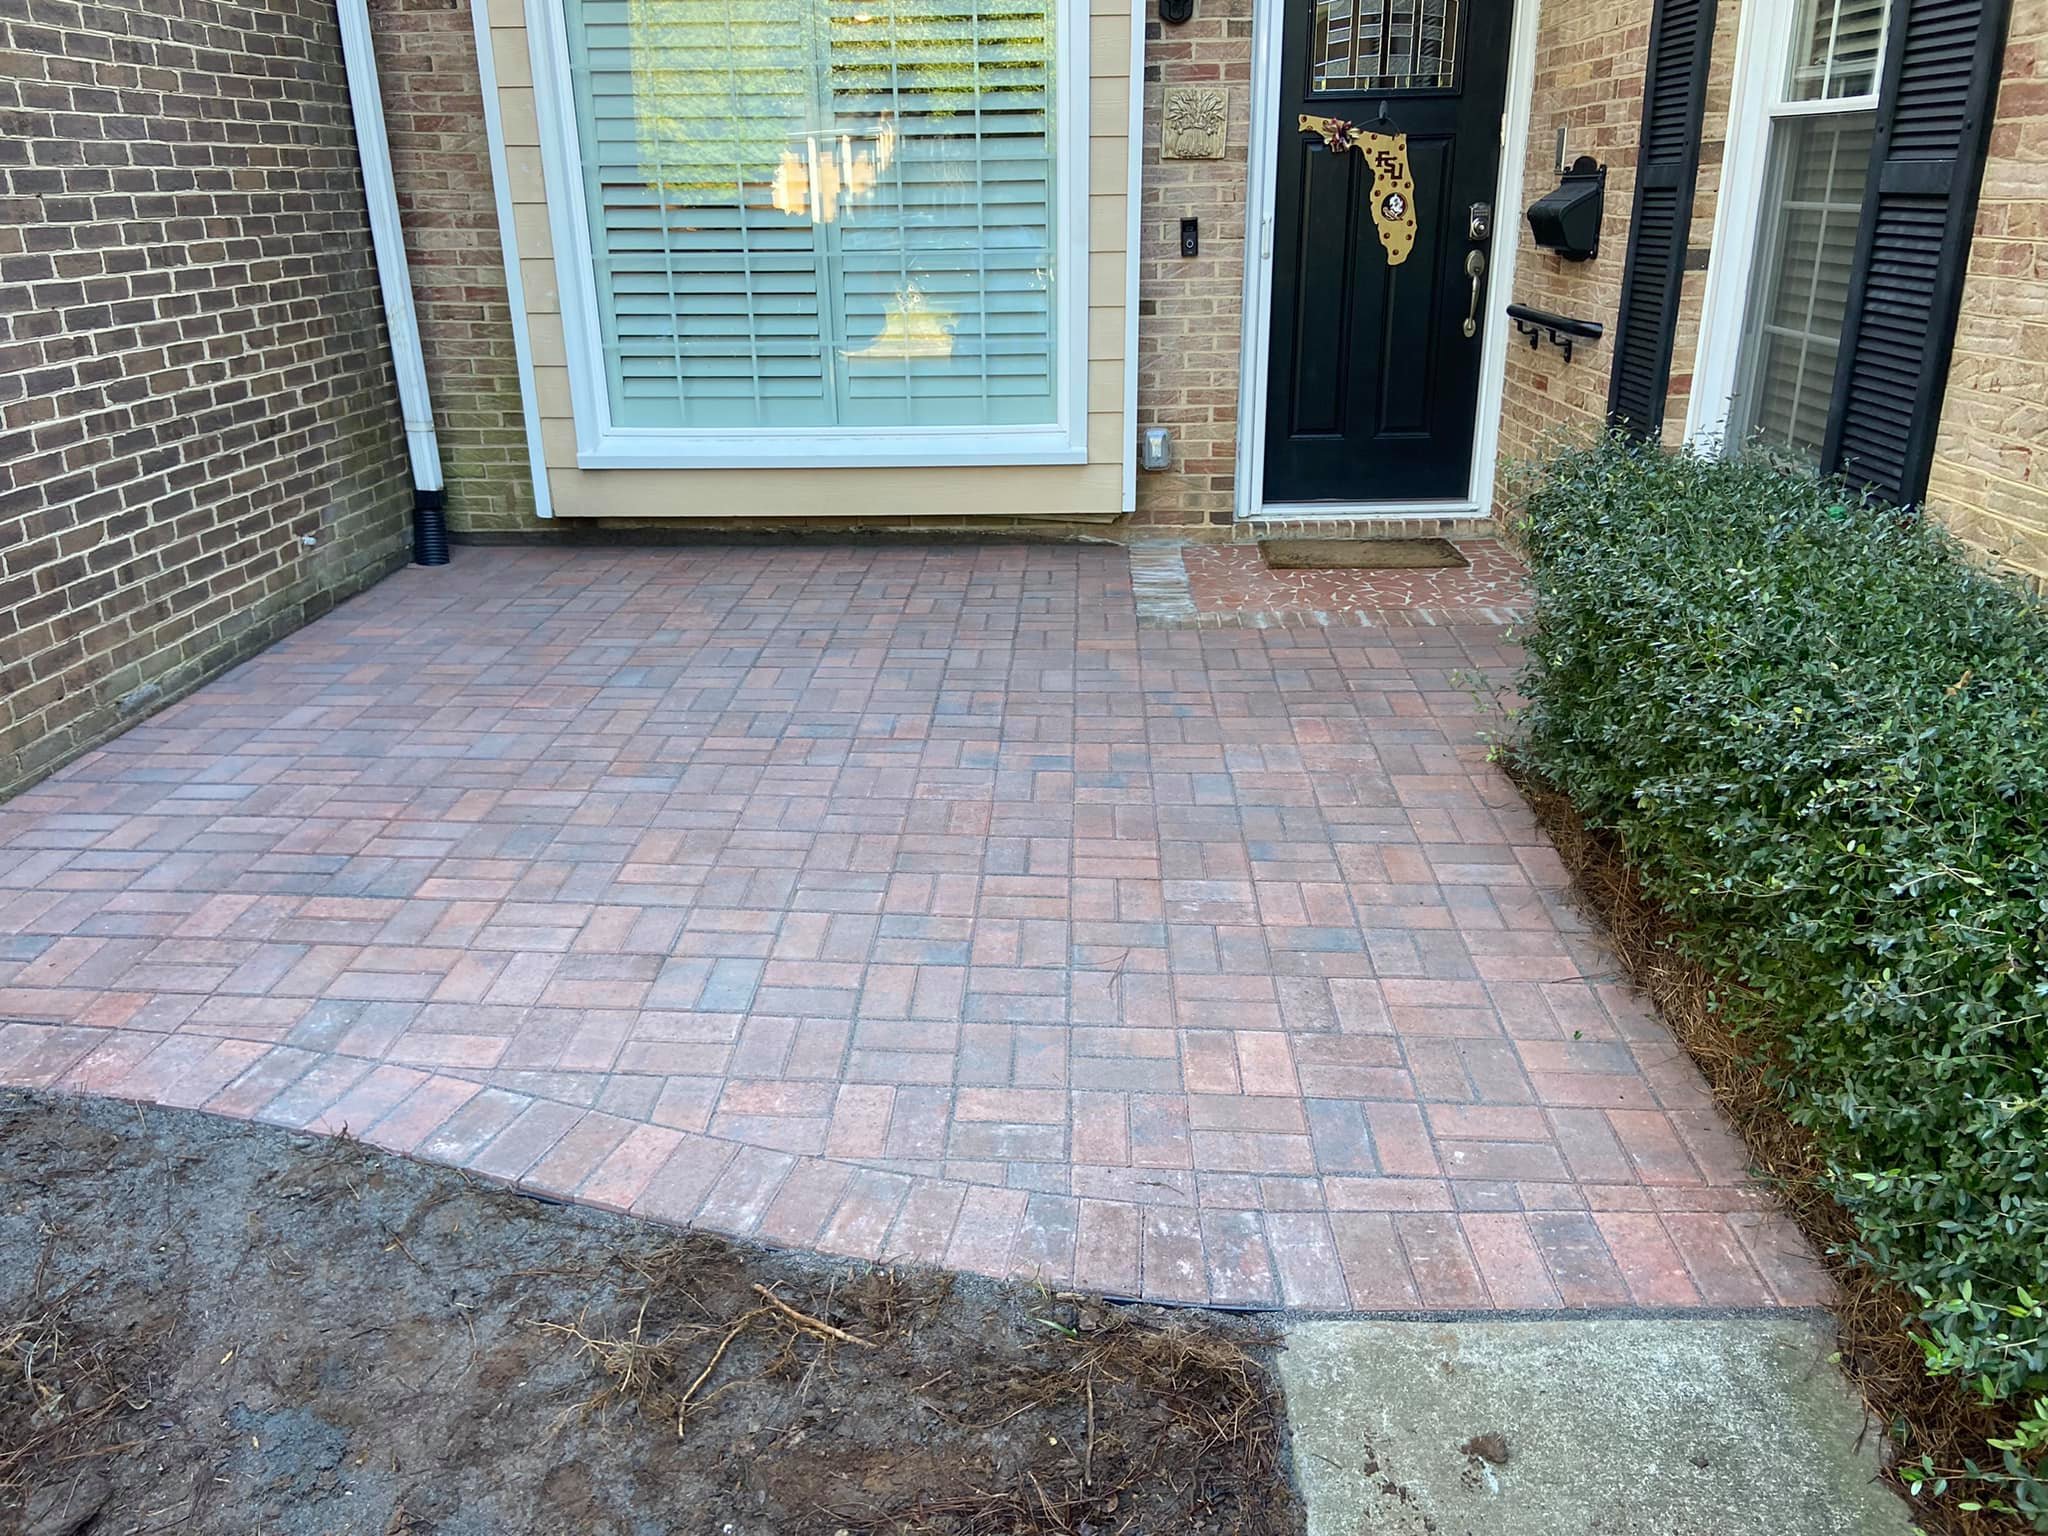 Belgard Guilford Blend Holland Paver Patio – Outdoor Living of the Day